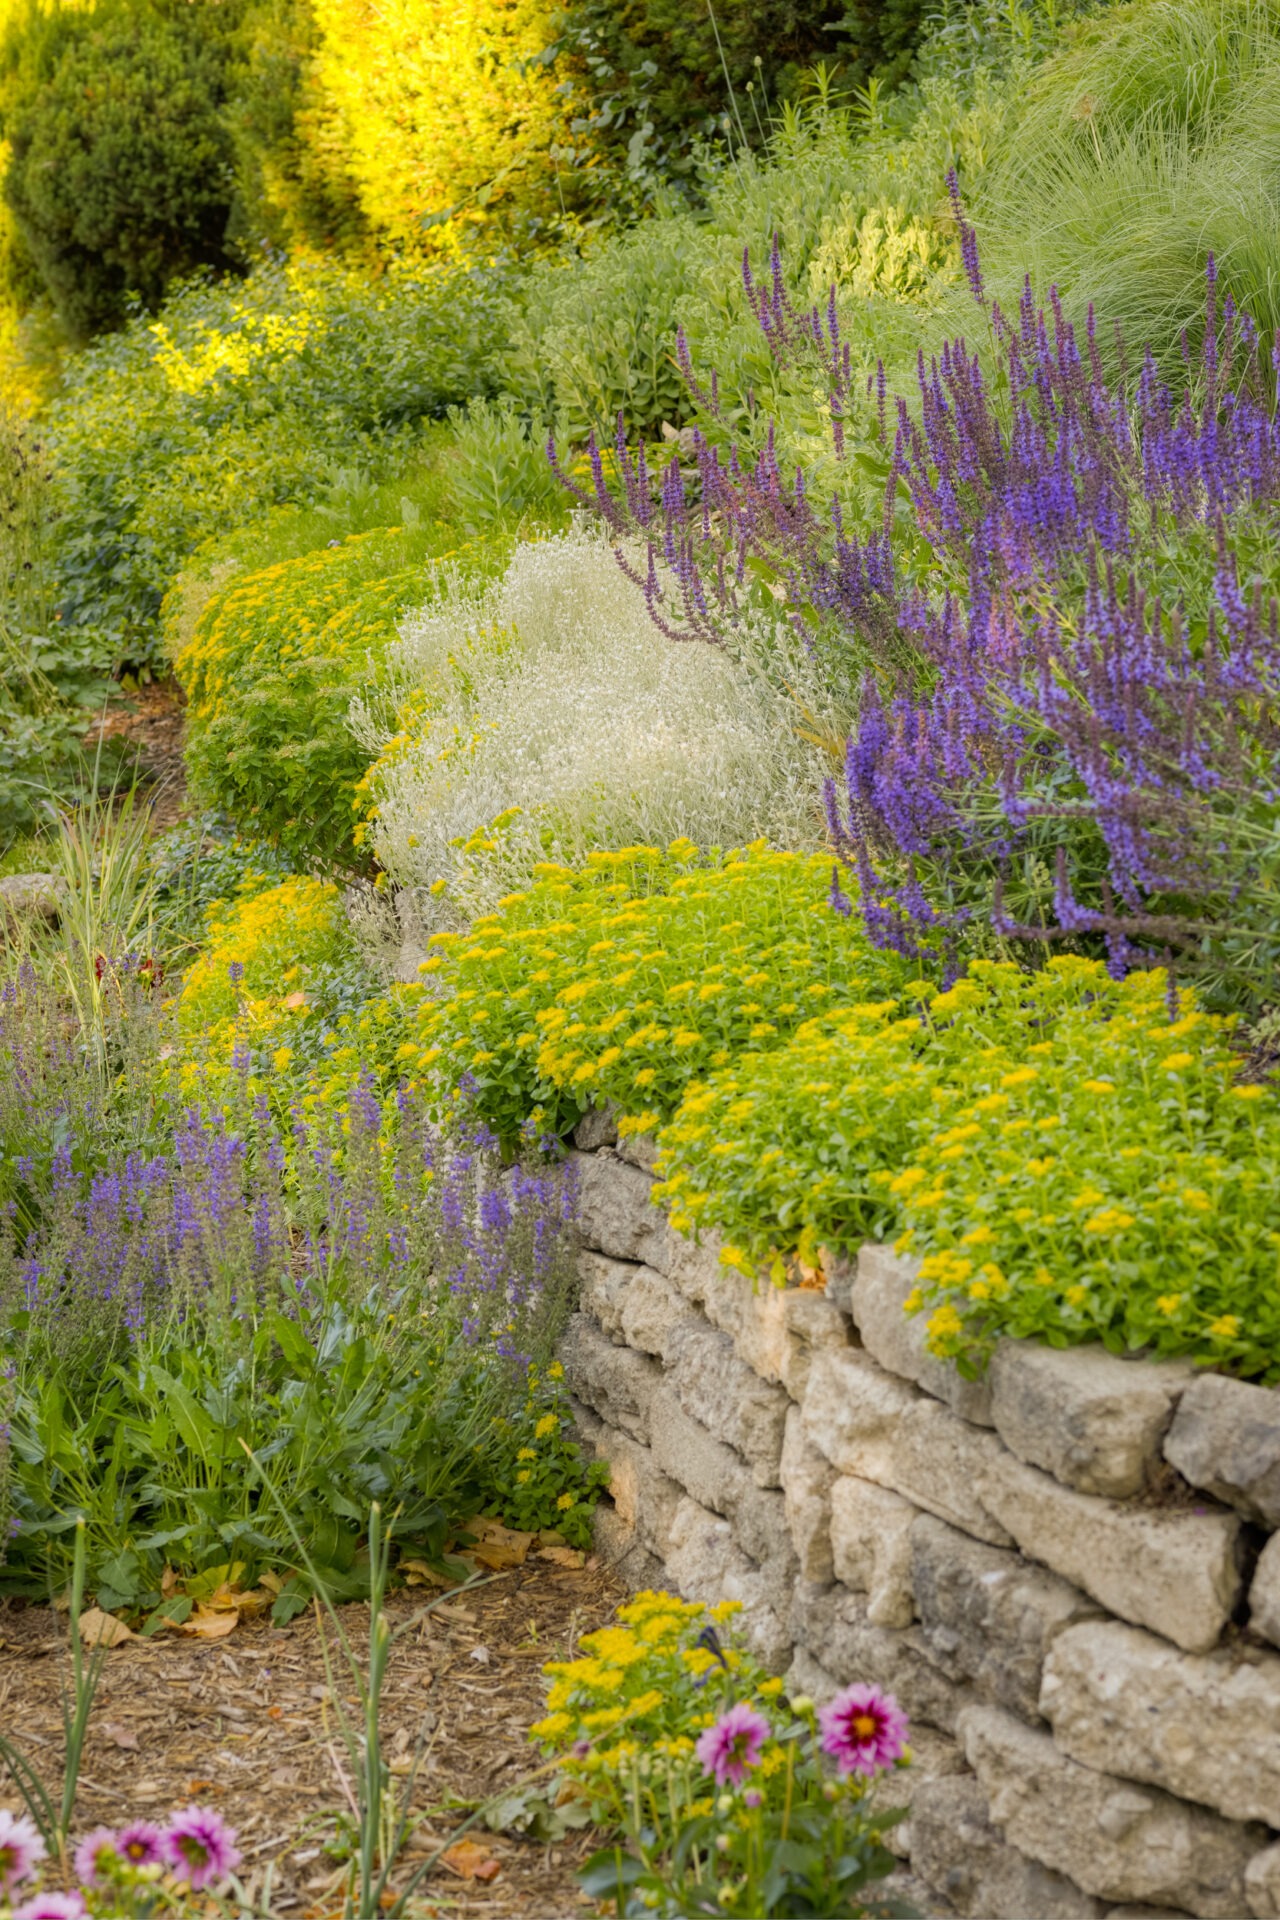 This image showcases a lush garden with colorful flowers blooming by a stone retaining wall, creating a vibrant display of purple, yellow, and green hues.